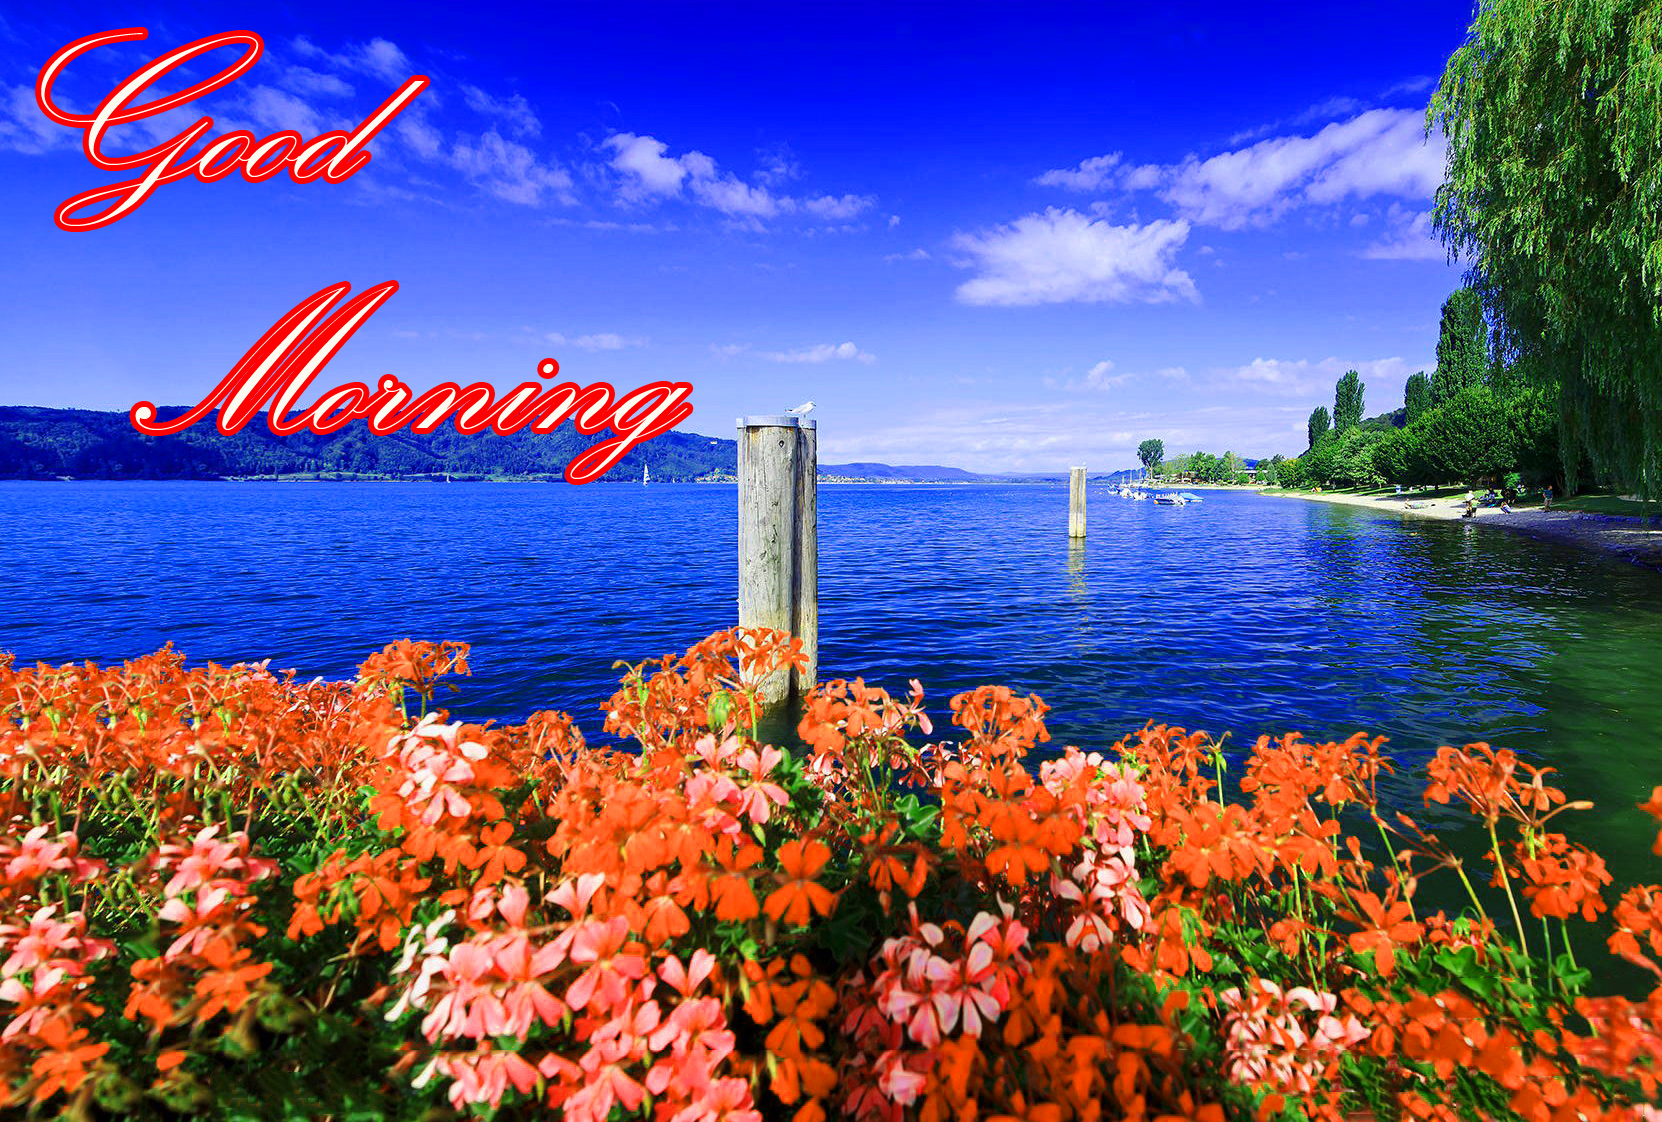 Good Morning Image Wallpaper Photo Picture Pics HD